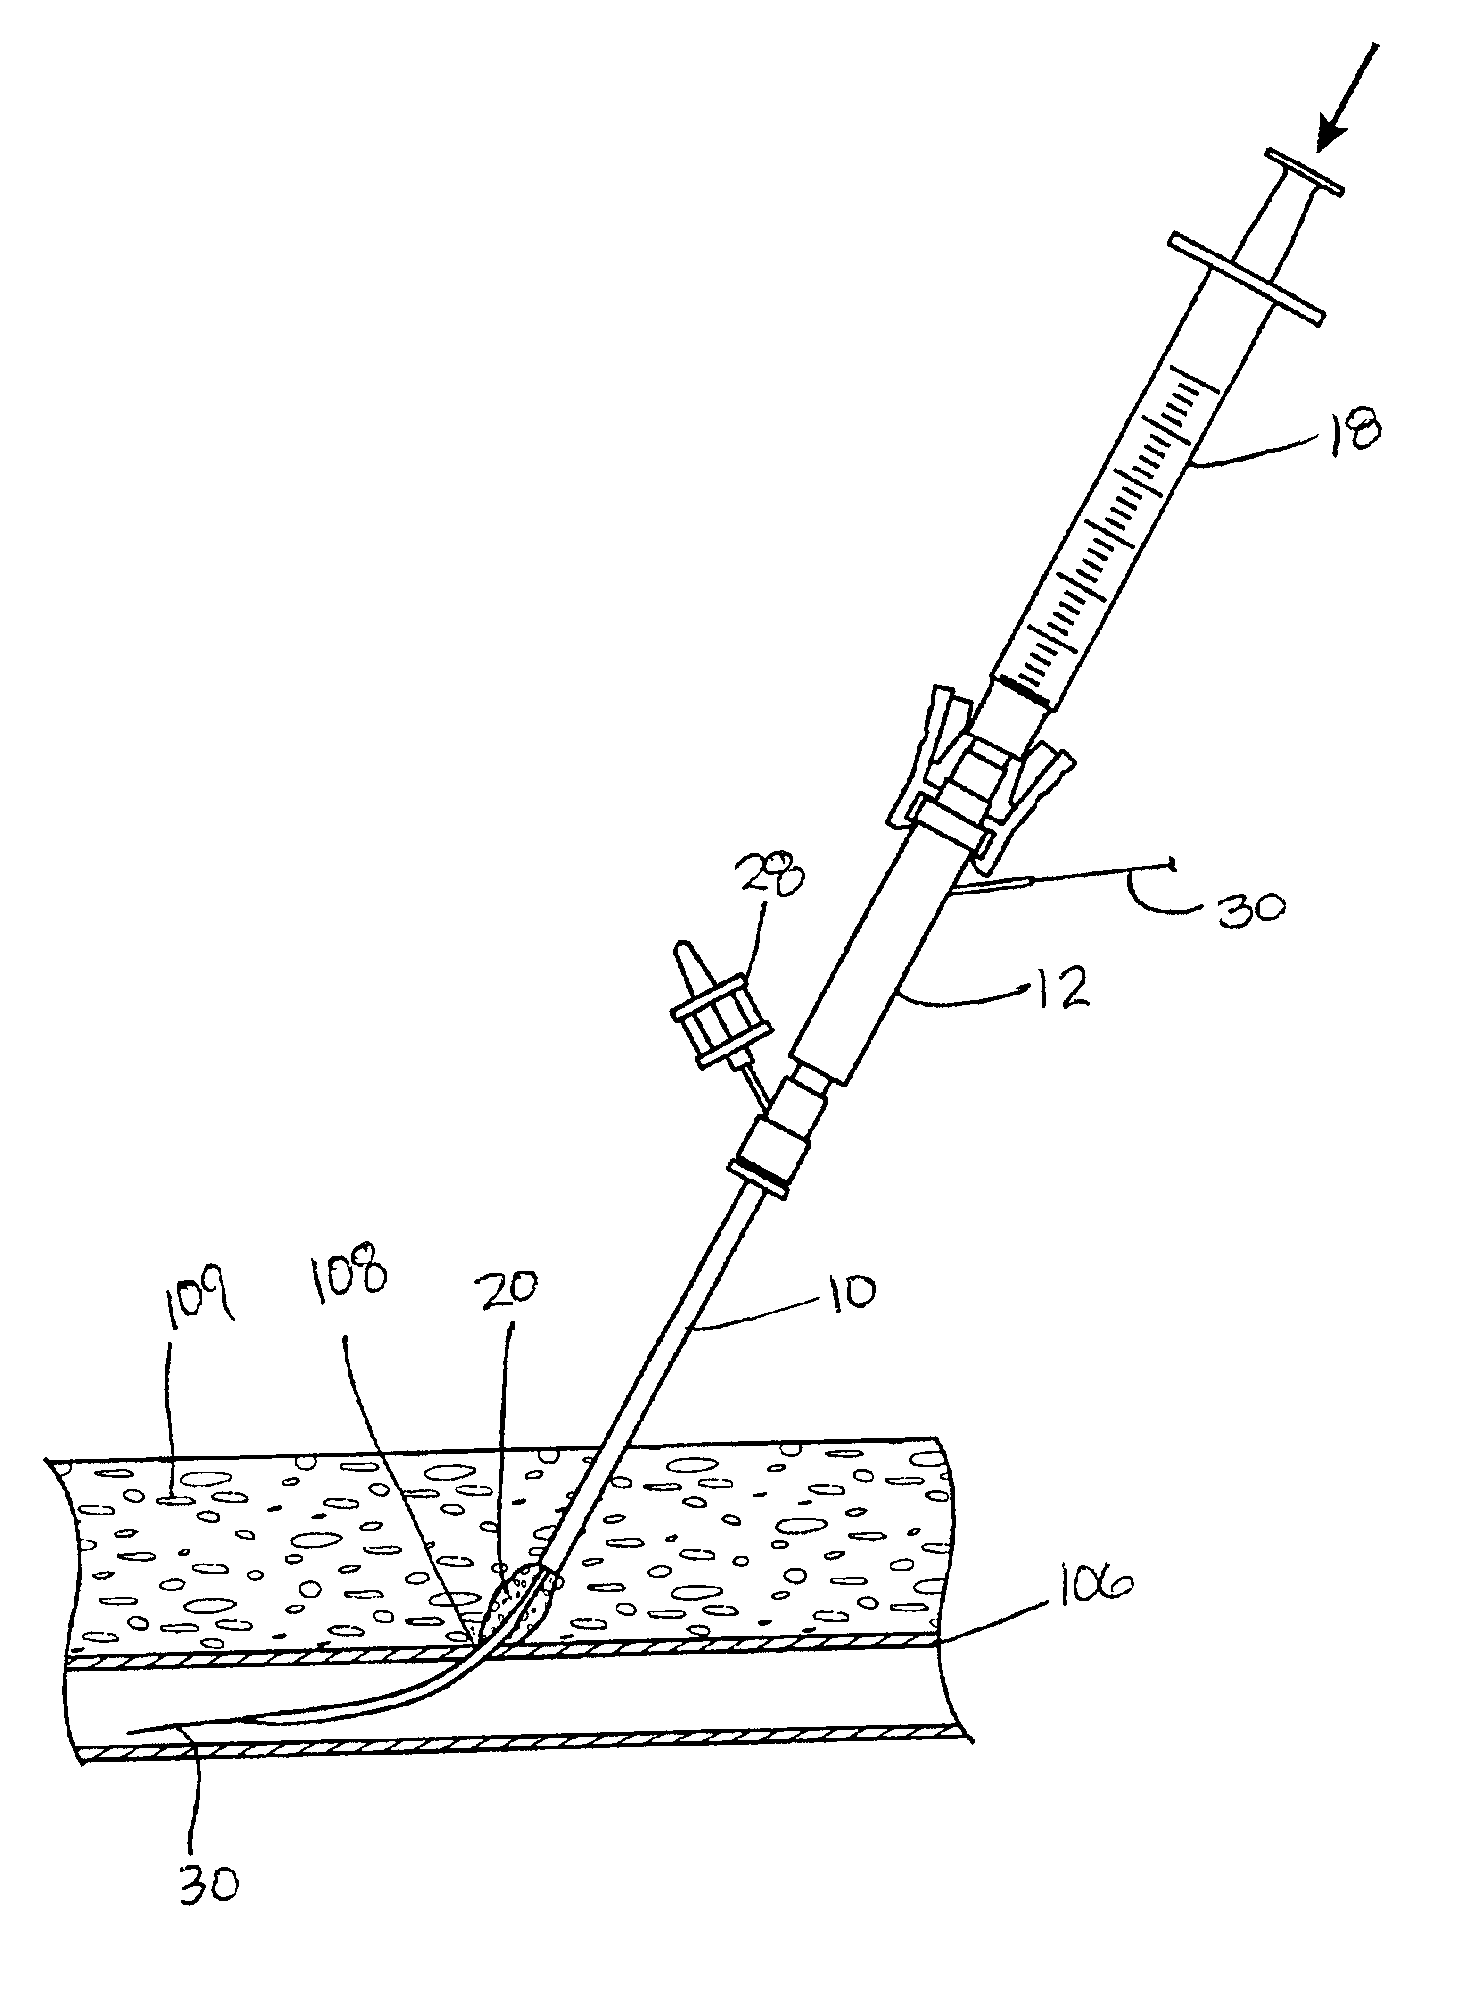 System and method for delivering hemostasis promoting material to a blood vessel puncture site by fluid pressure